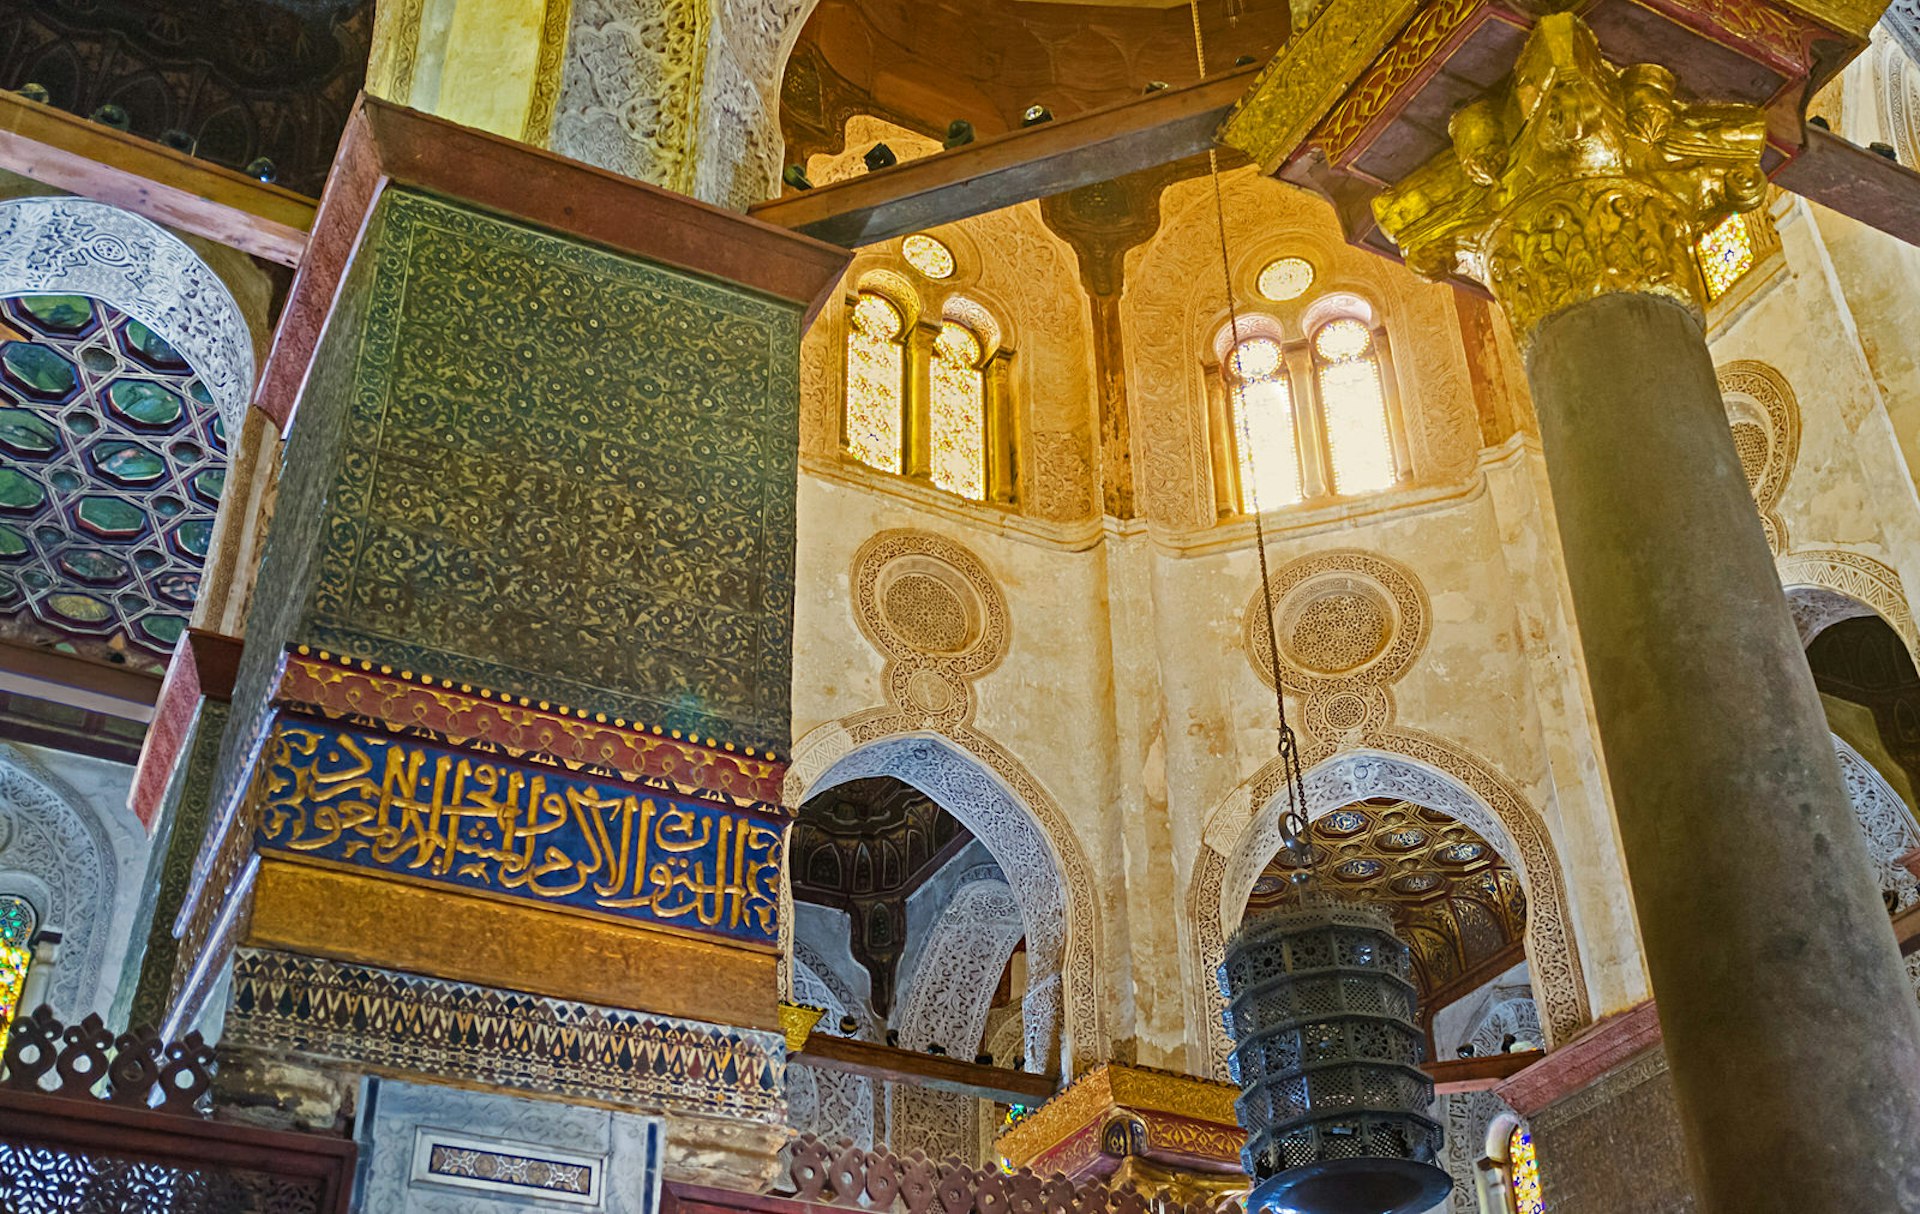 The interiors of Qalawun Mausoleum are the perfect examples of medieval Islamic art. Image by eFesenko / Shutterstock